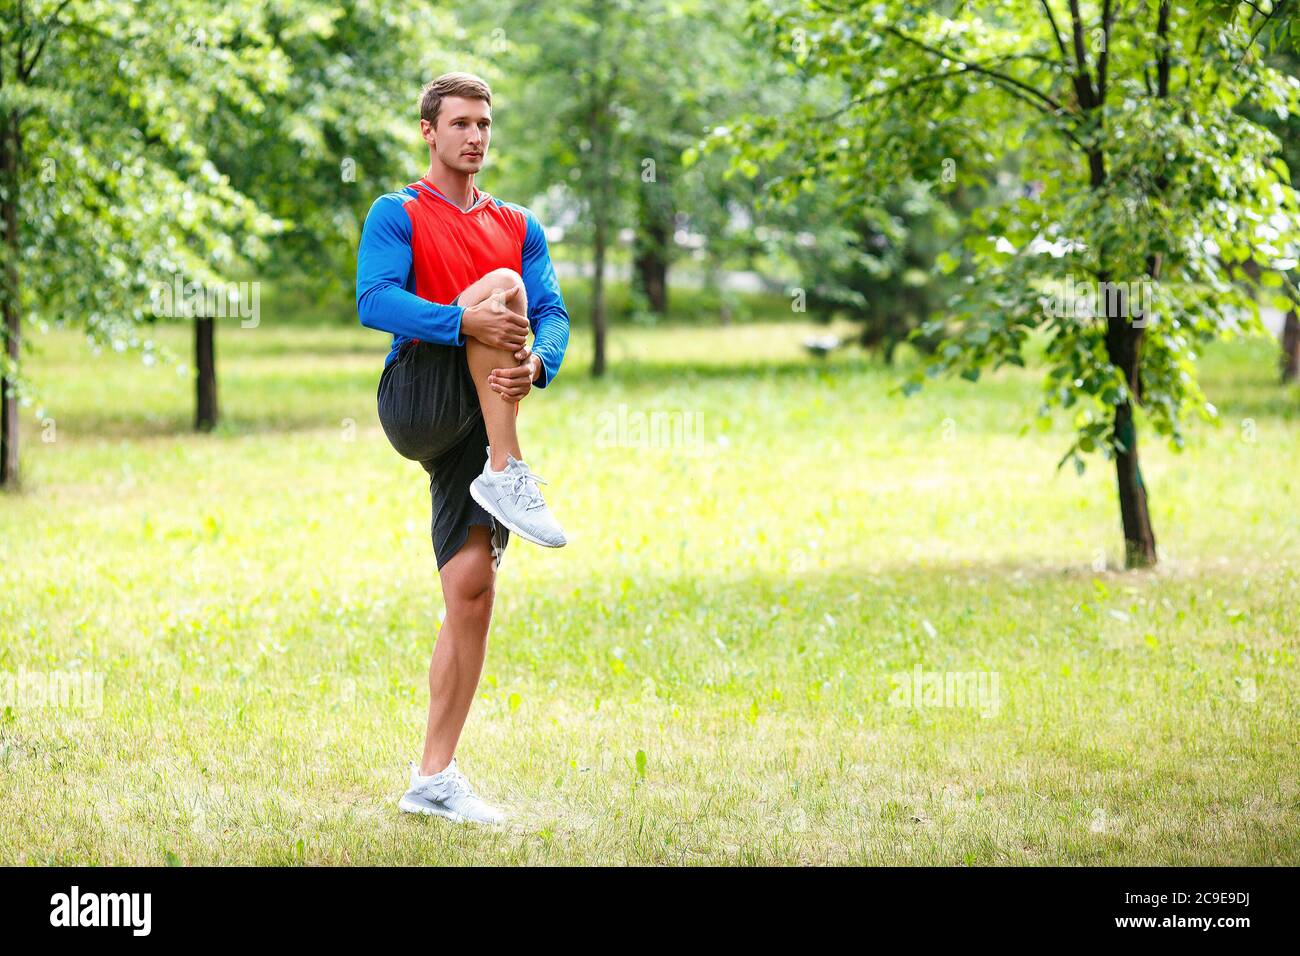 Sport and healthy lifestyle concept - jogger man stretcing muscles in public park. Stock Photo